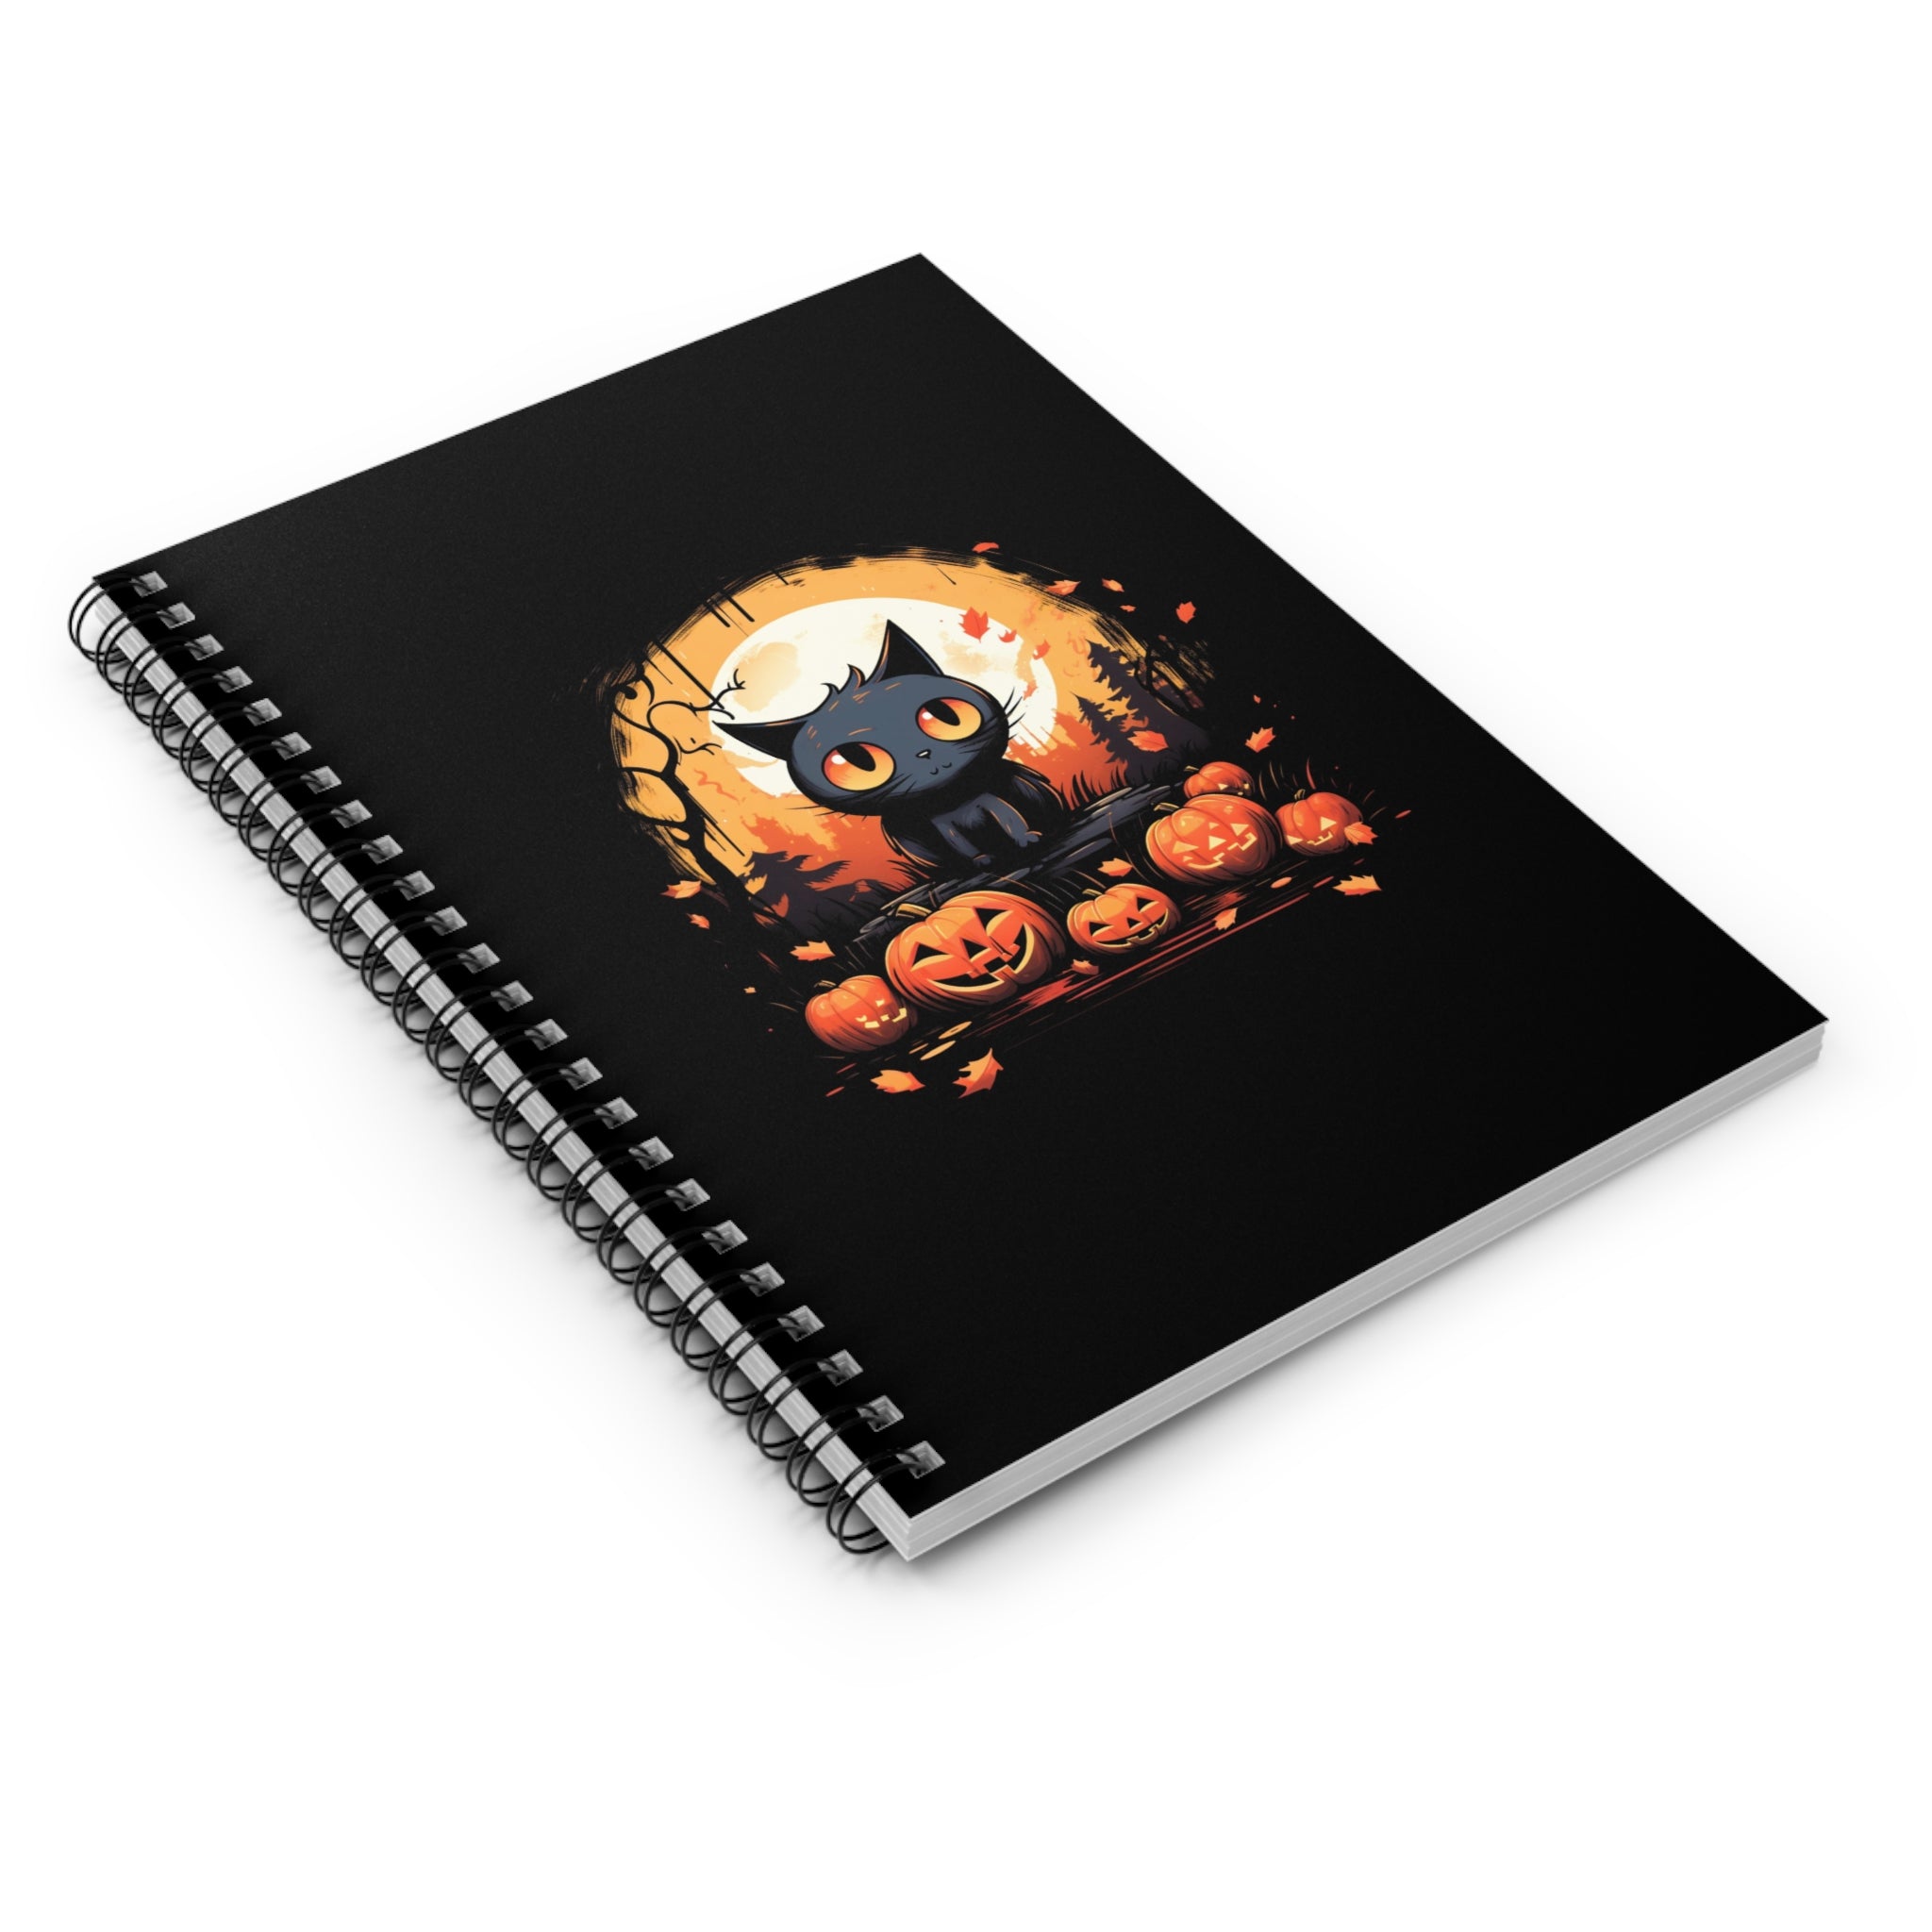 All Hallows Kitty | Halloween Spooky Journal | Spiral Notebook - Ruled Line